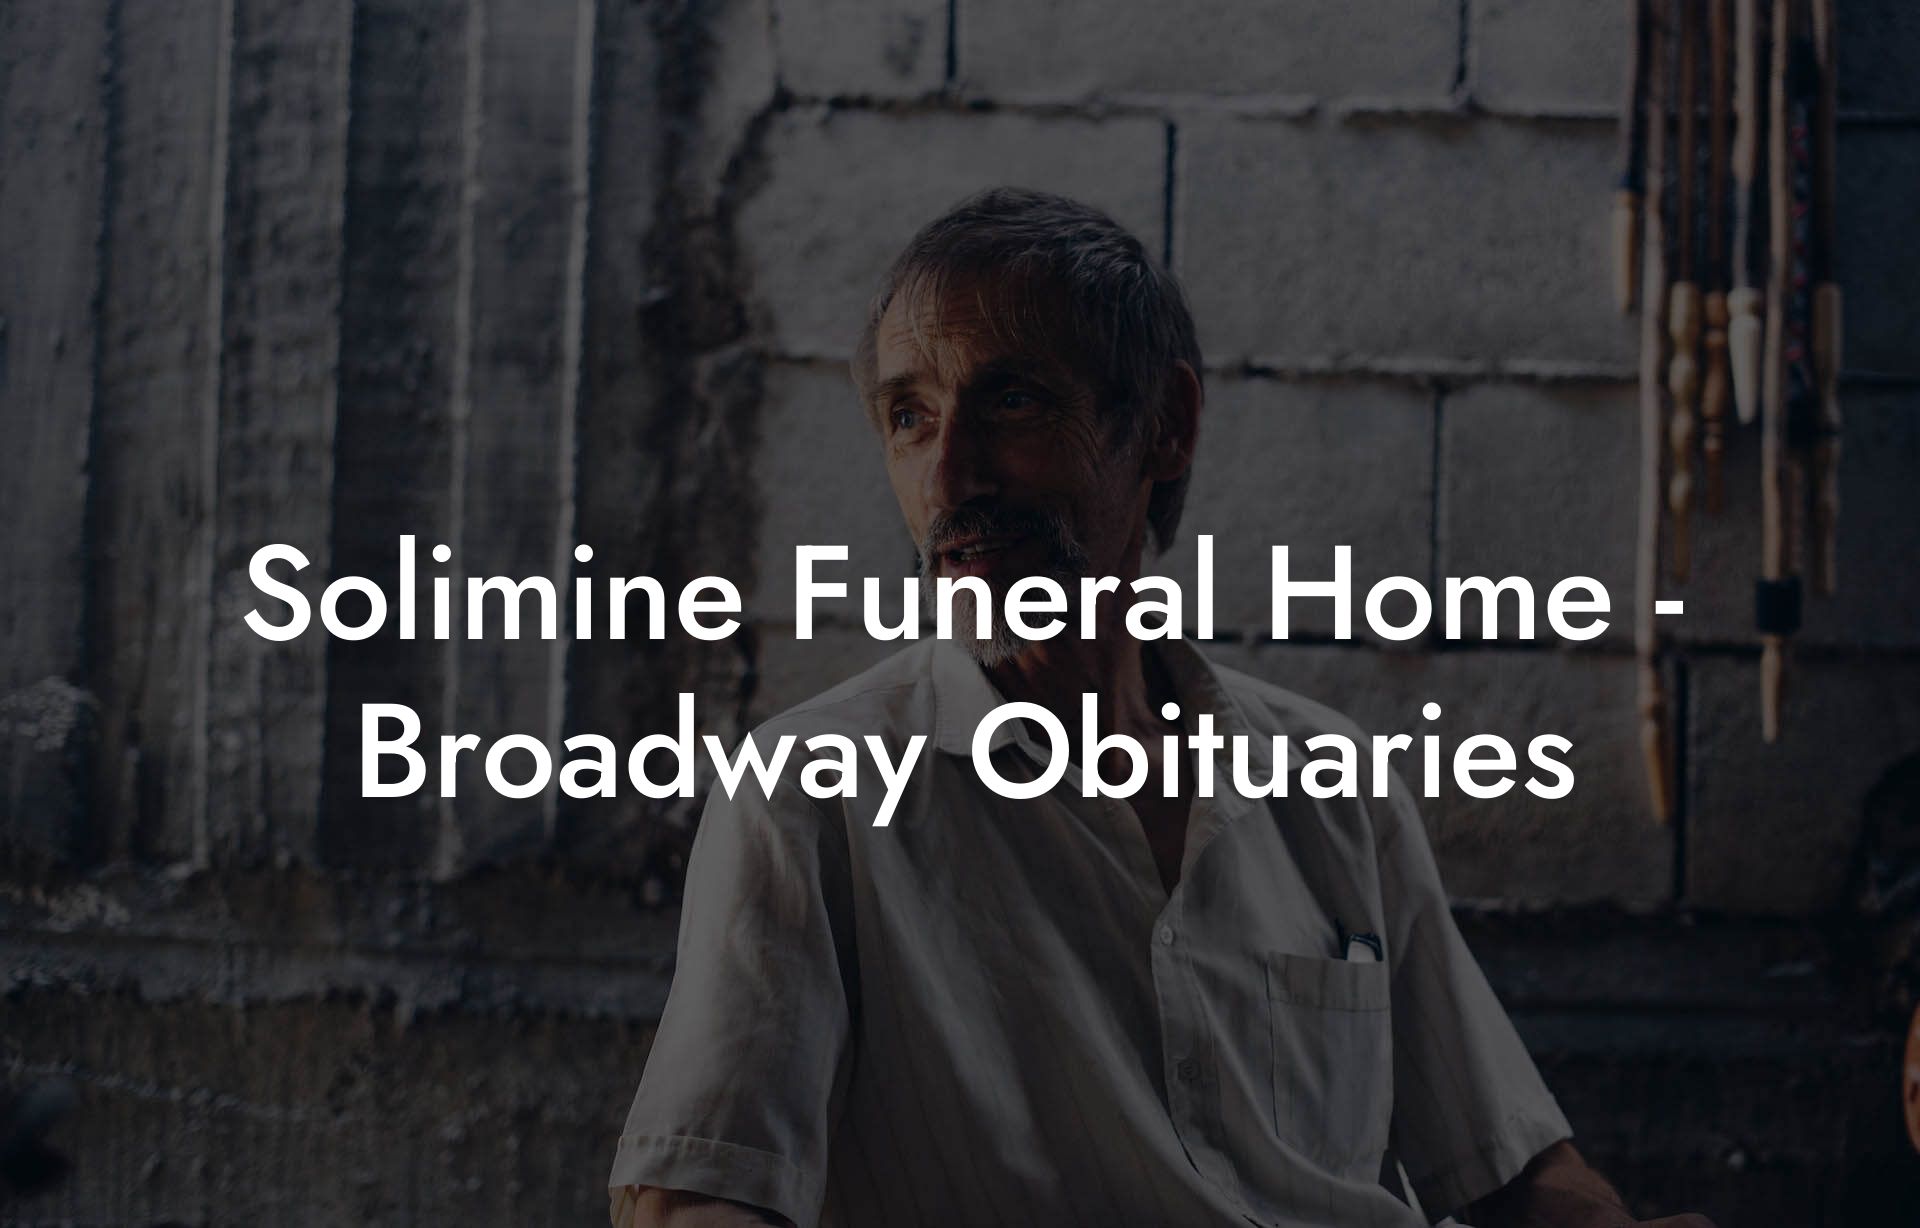 Solimine Funeral Home - Broadway Obituaries